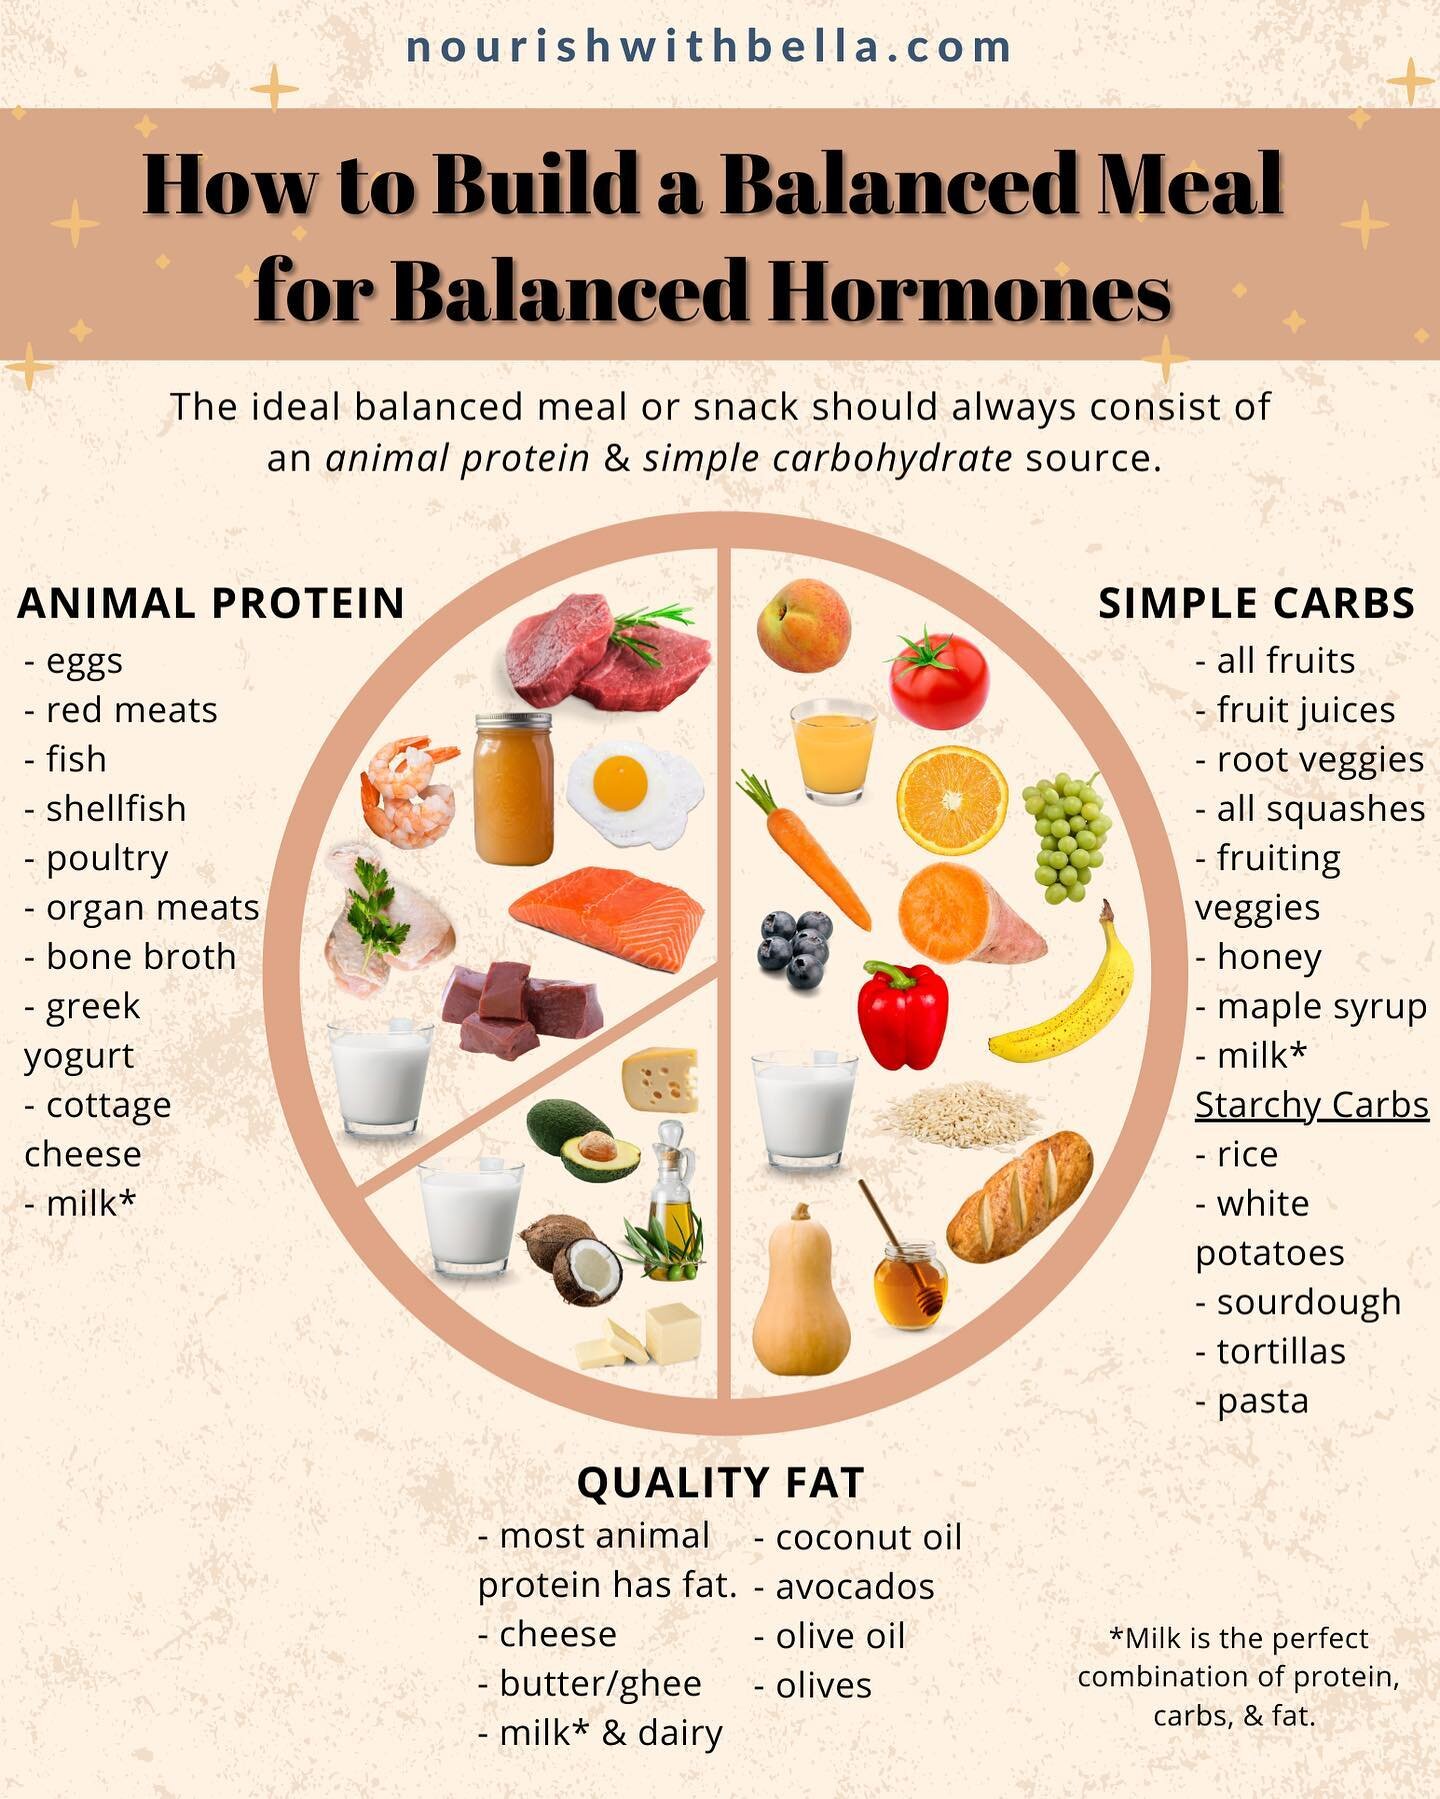 Replying to @Morgan some basic estrogen boosting tips from a diet